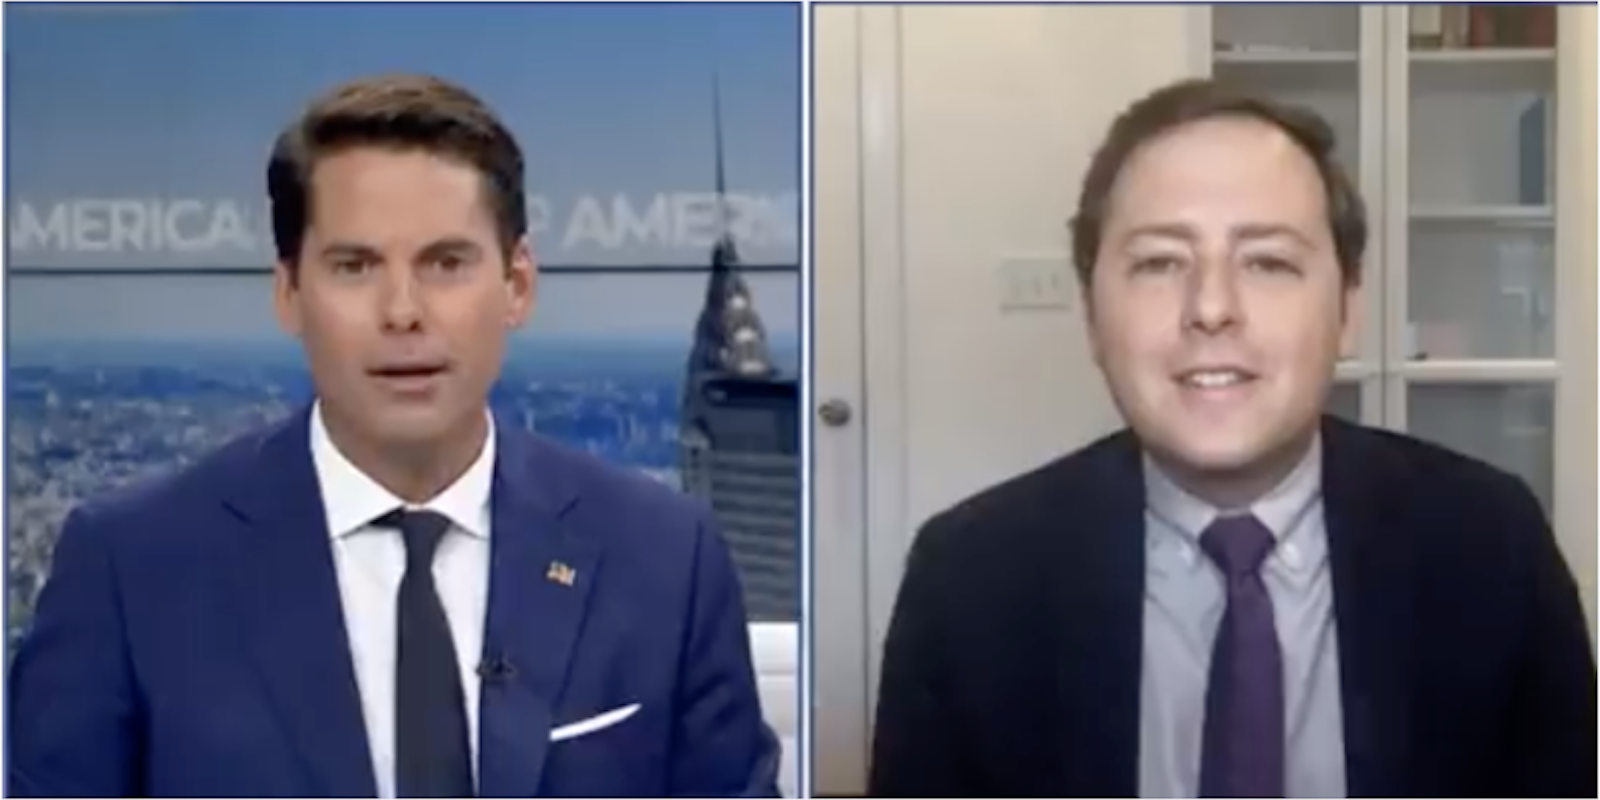 Obama speechwriter David Litt roasted Newsmax anchor about the Dominion lawsuit in a segment about SNL